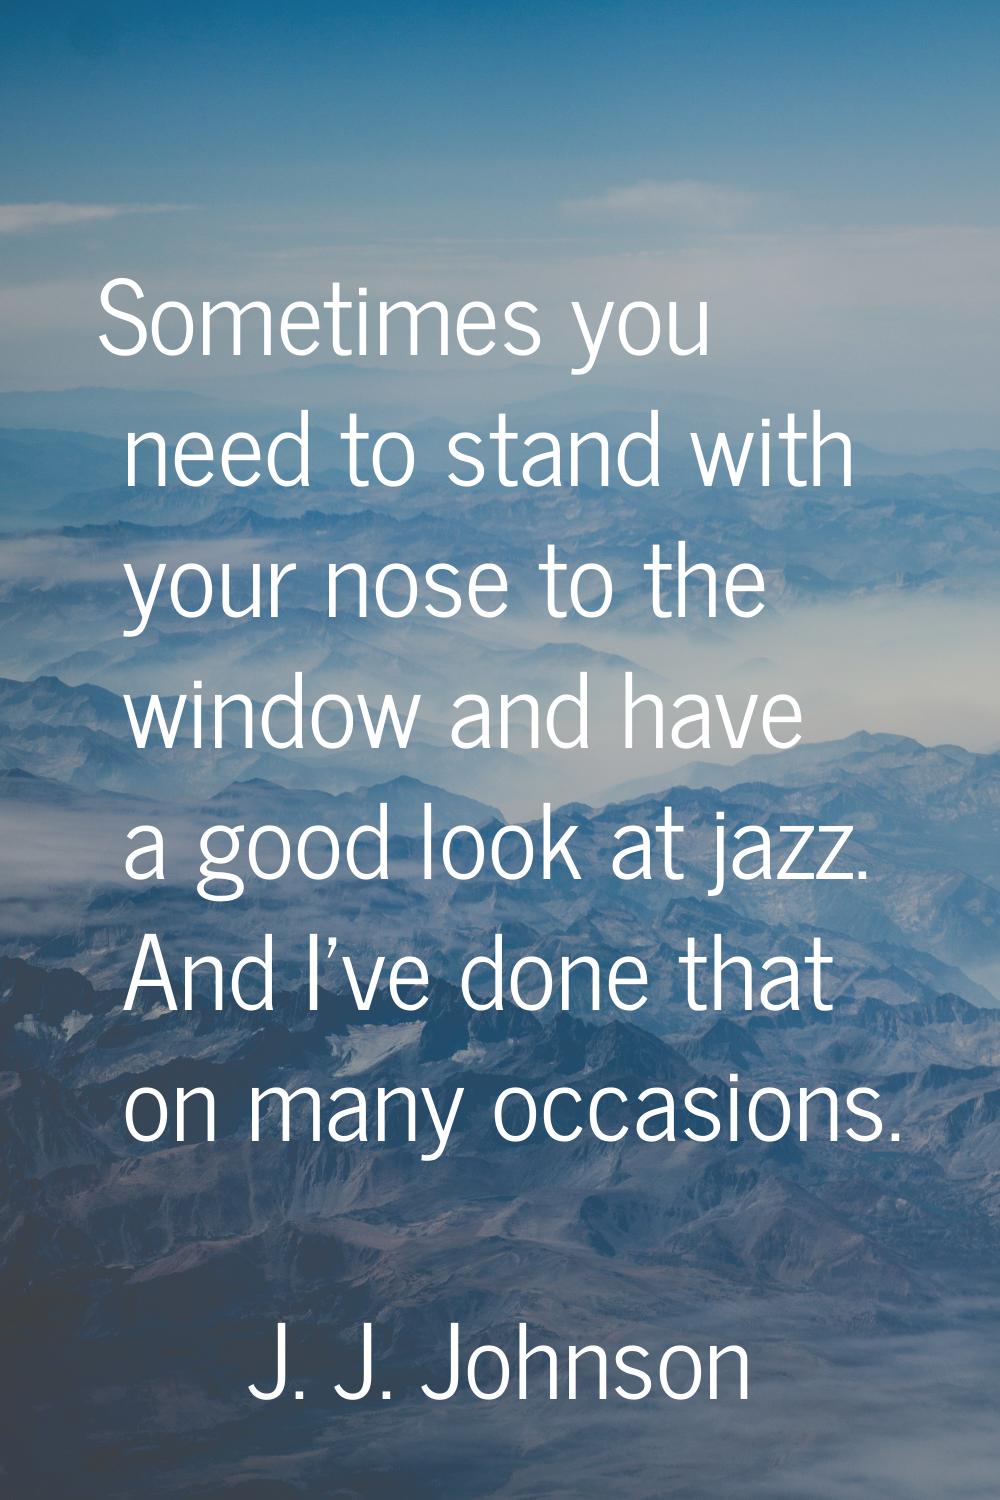 Sometimes you need to stand with your nose to the window and have a good look at jazz. And I've don